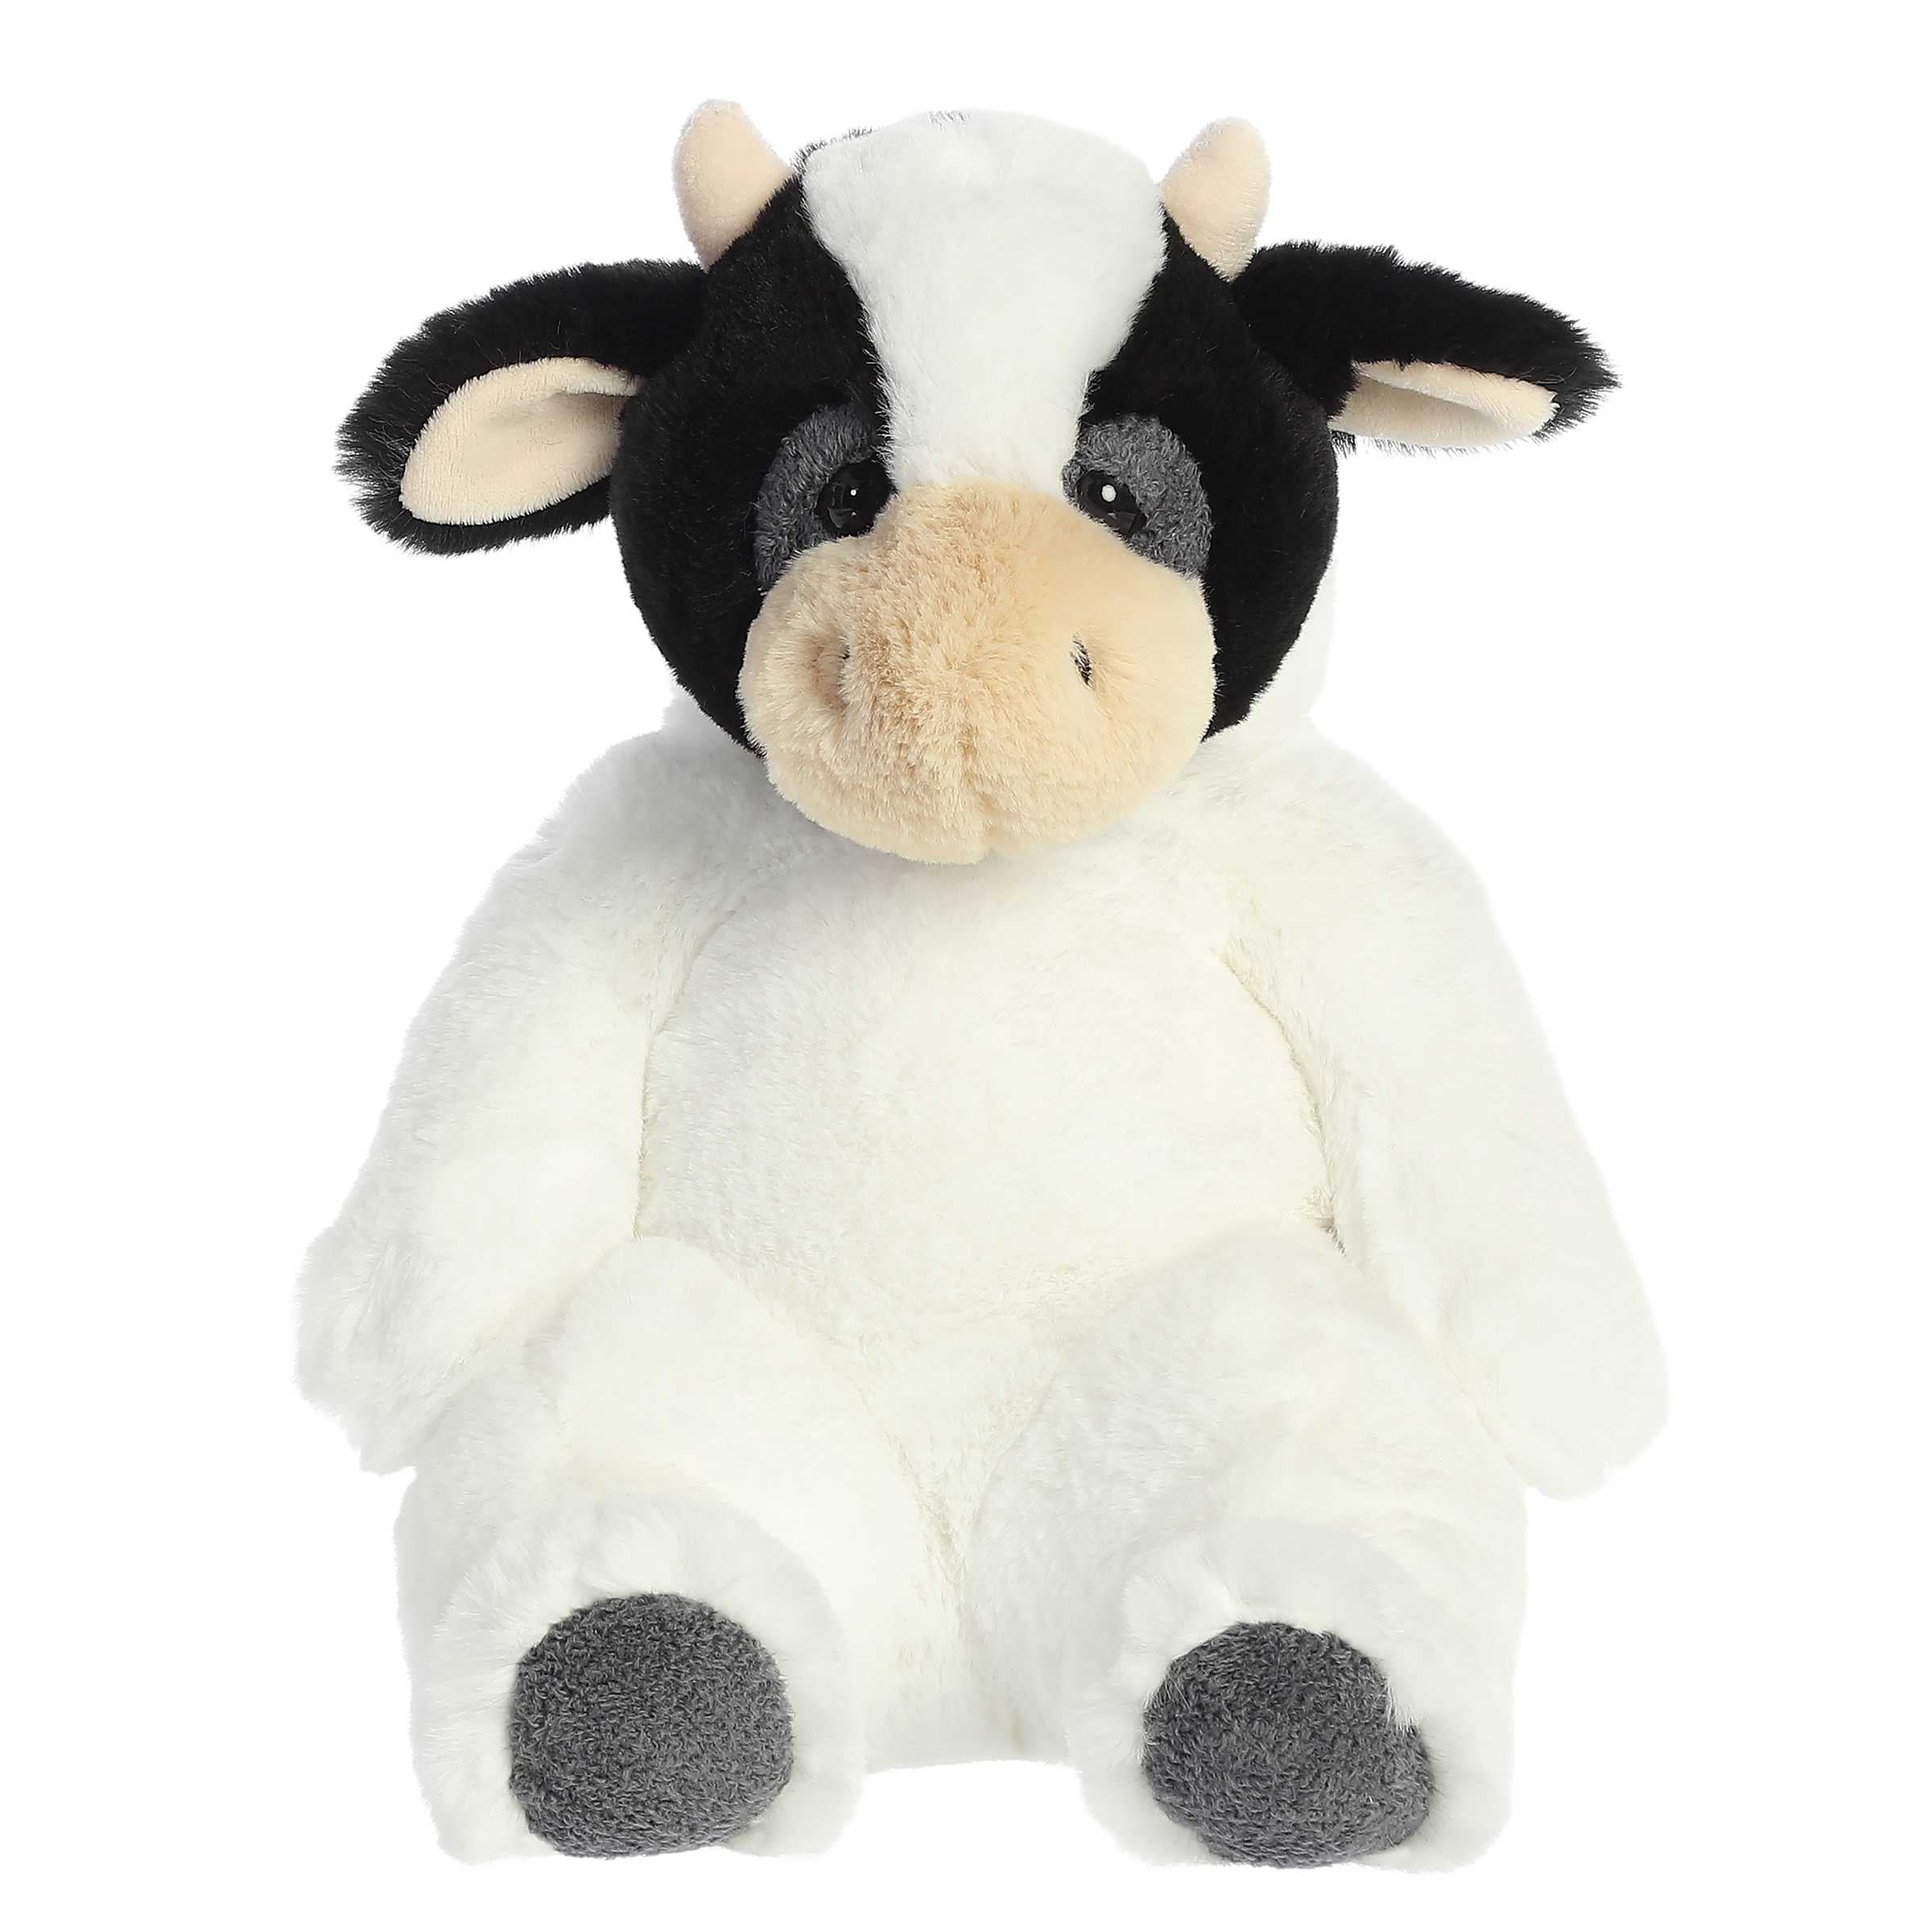 Plush cow with black and white spots, soft horns, and a sleepy expression, made from ultra-soft materials for snuggling.